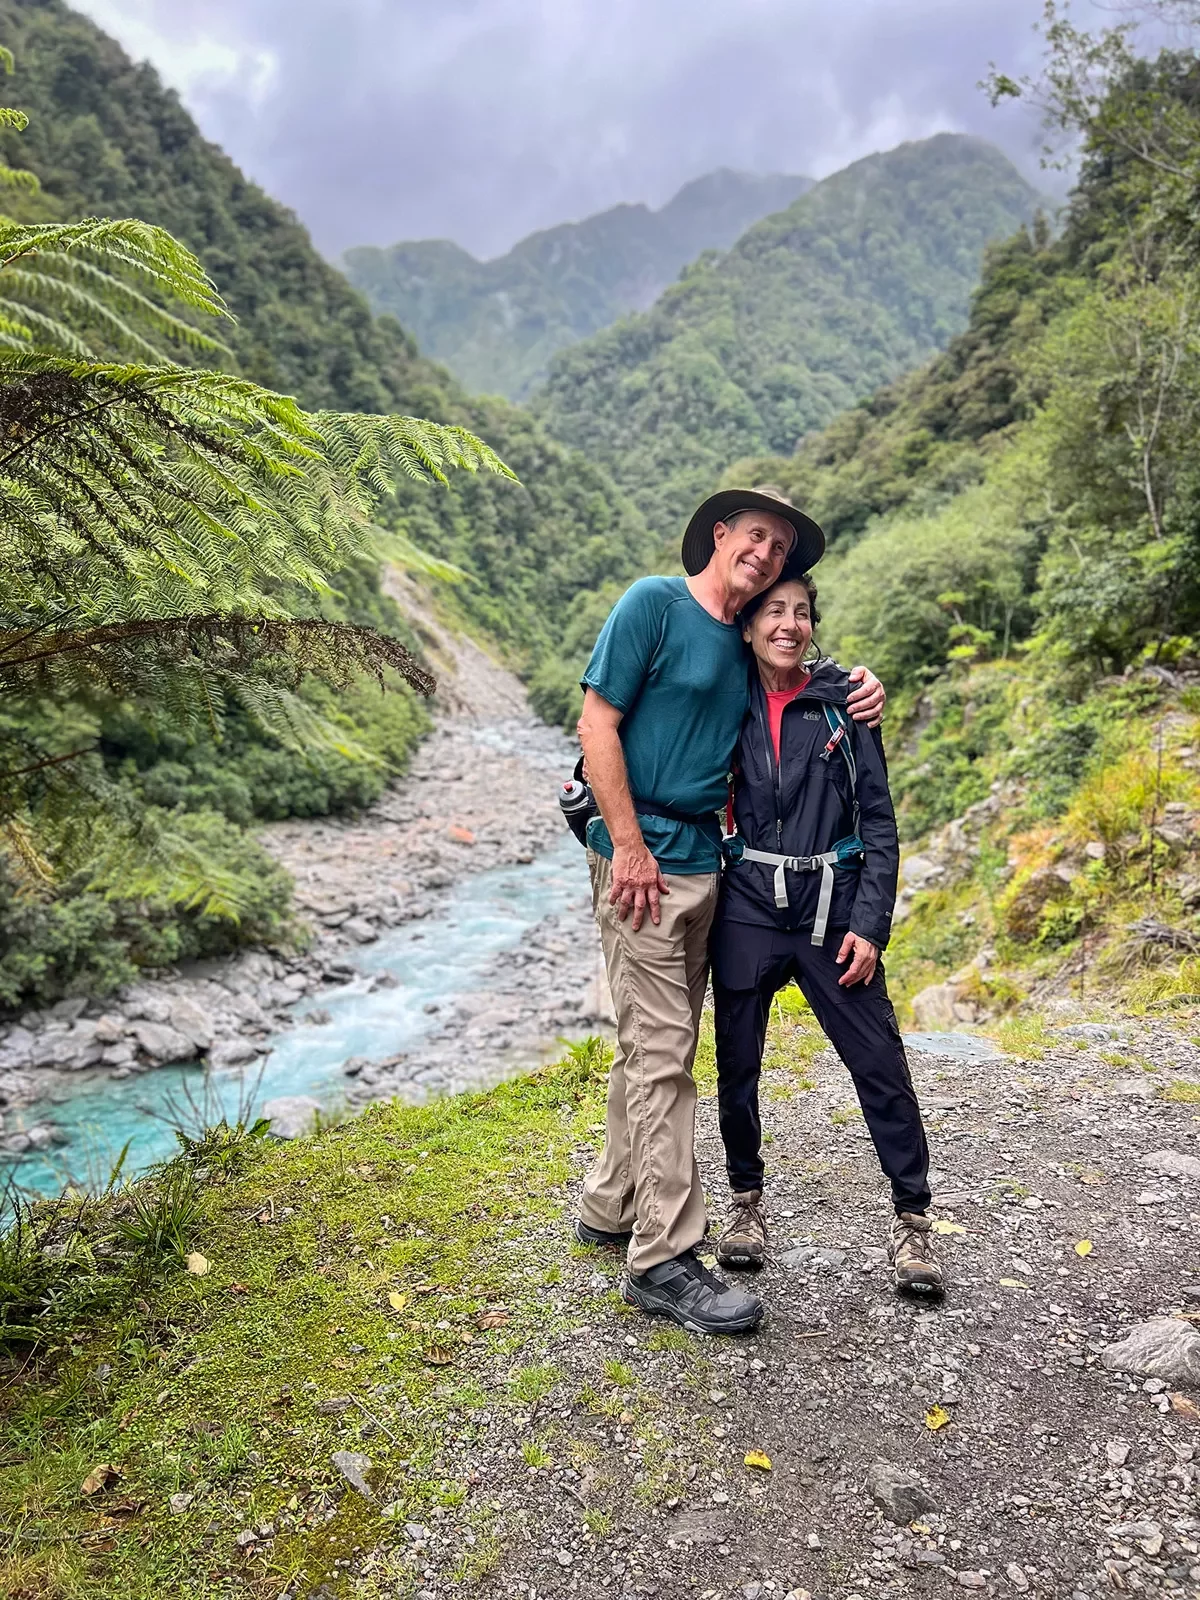 Two people posing next to a stream in New Zealand